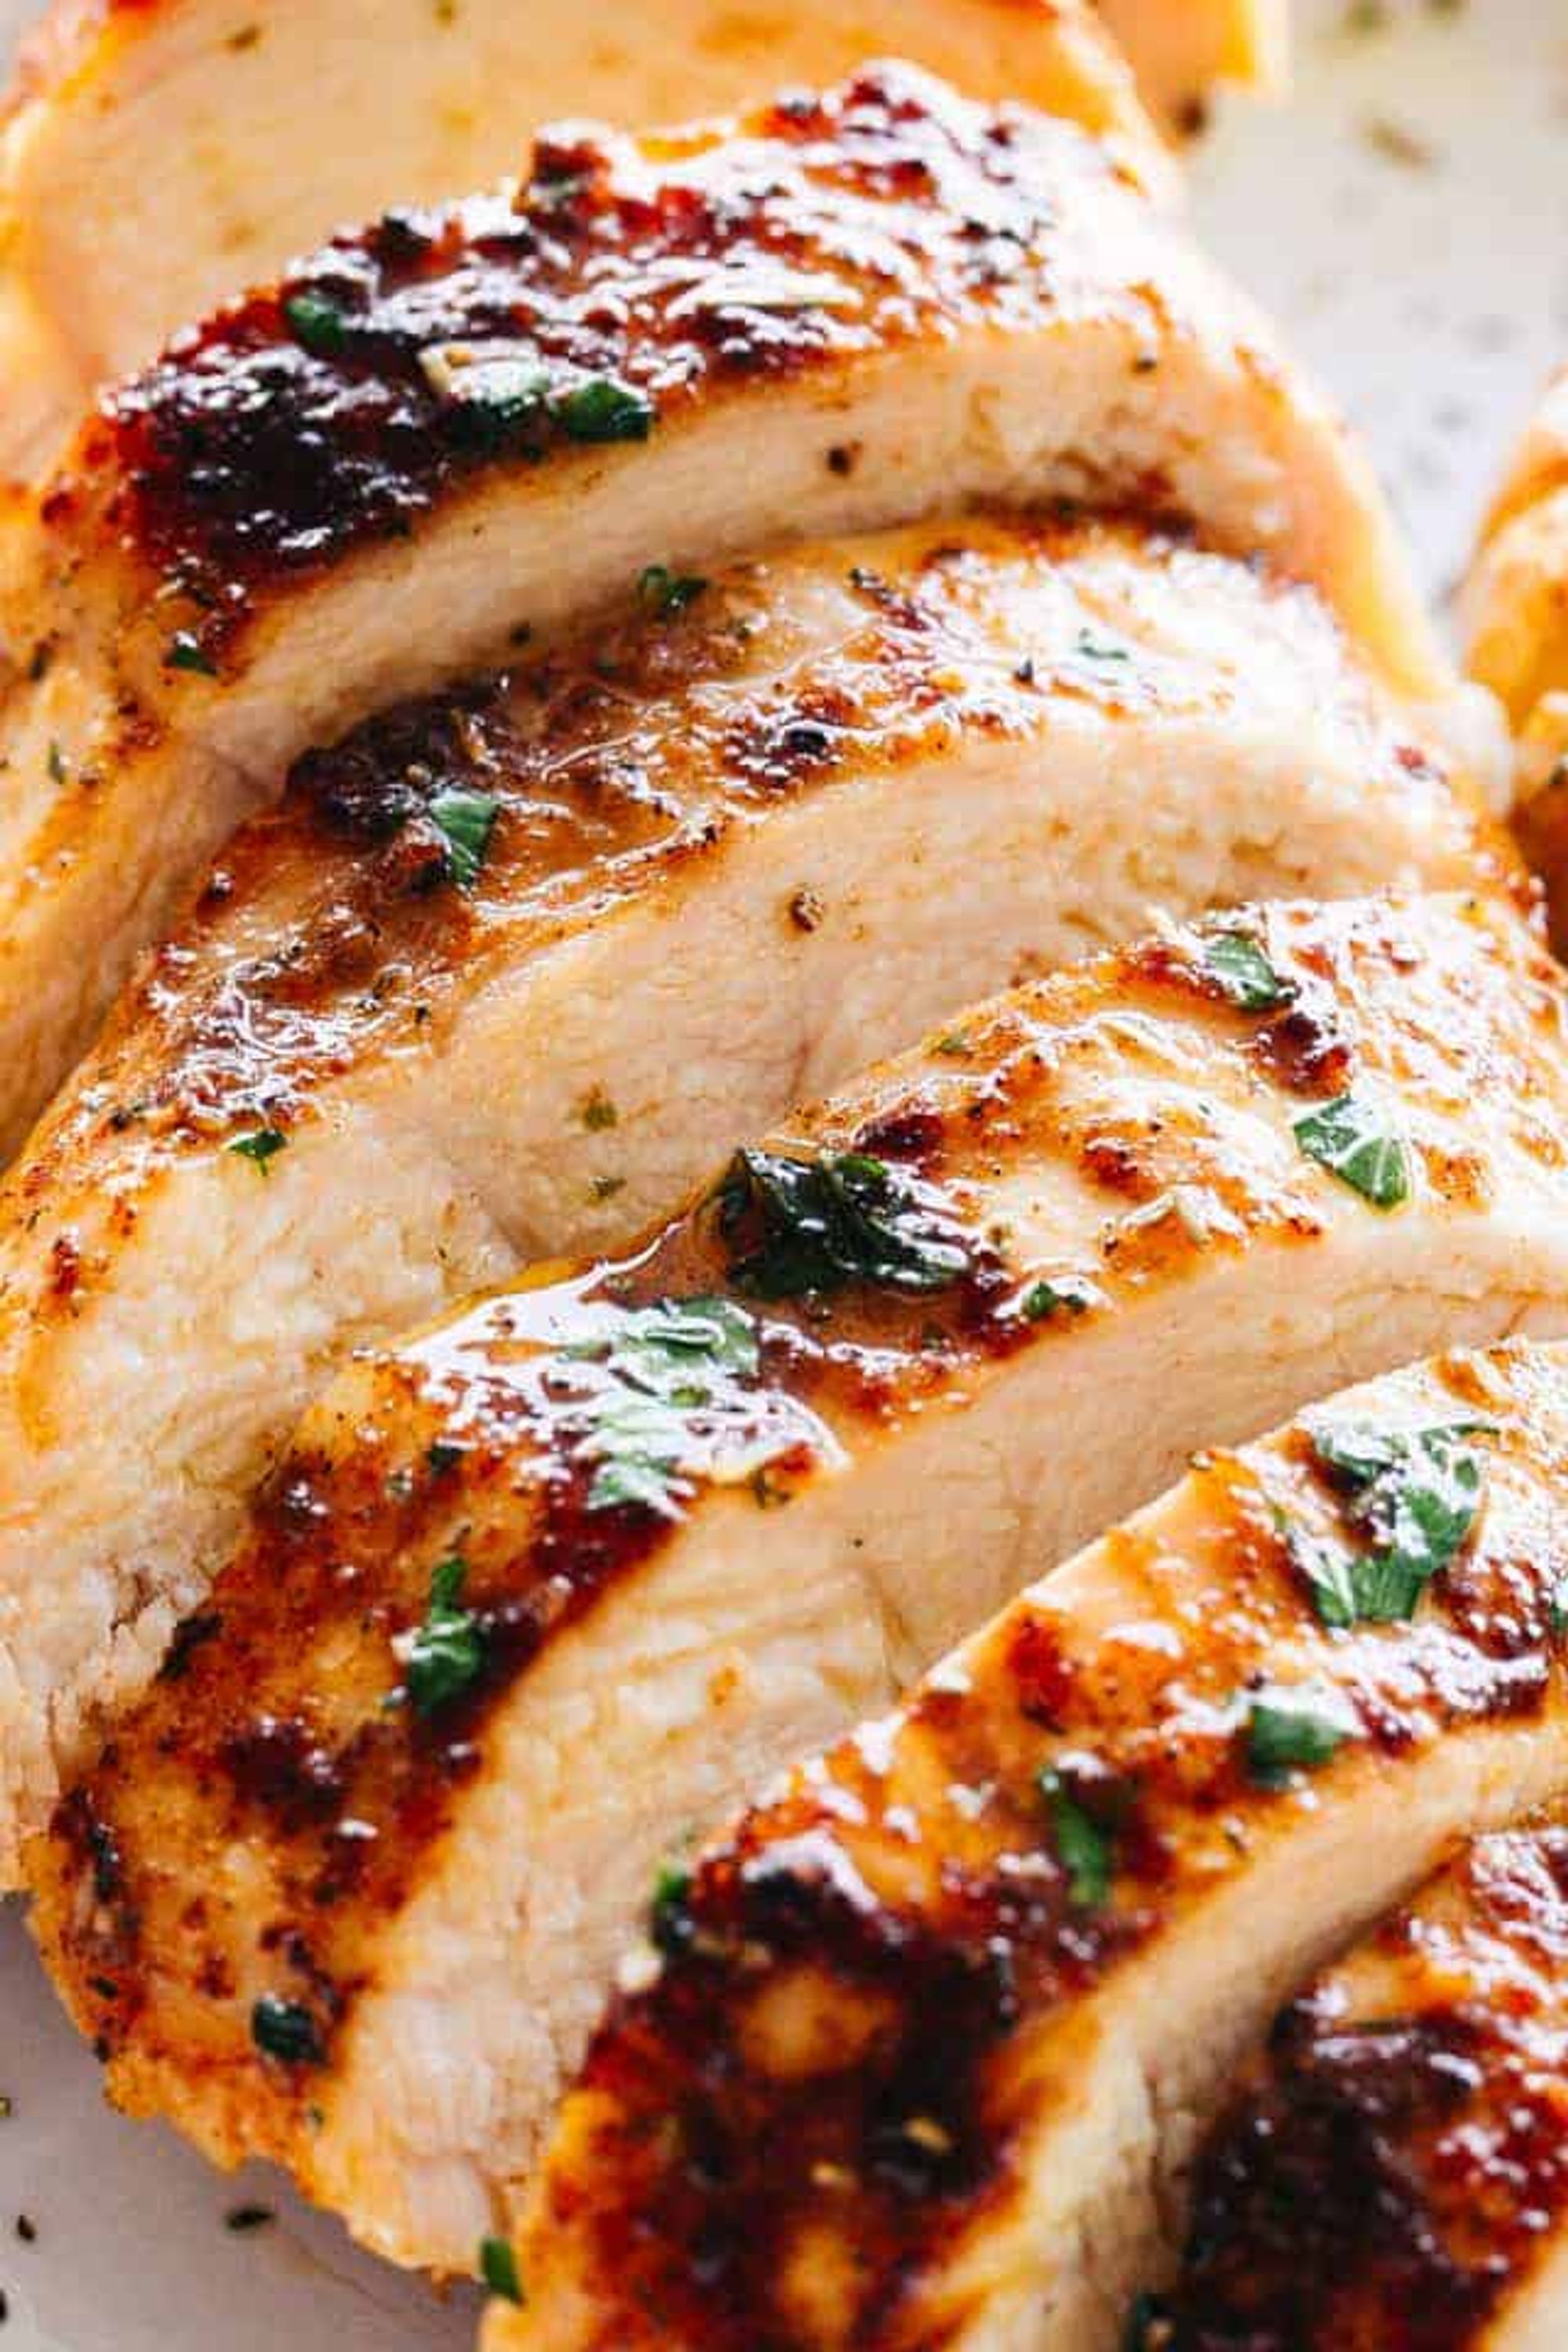 Oven Baked Chicken Breasts Recipe | How to Cook Chicken Breasts - My ...